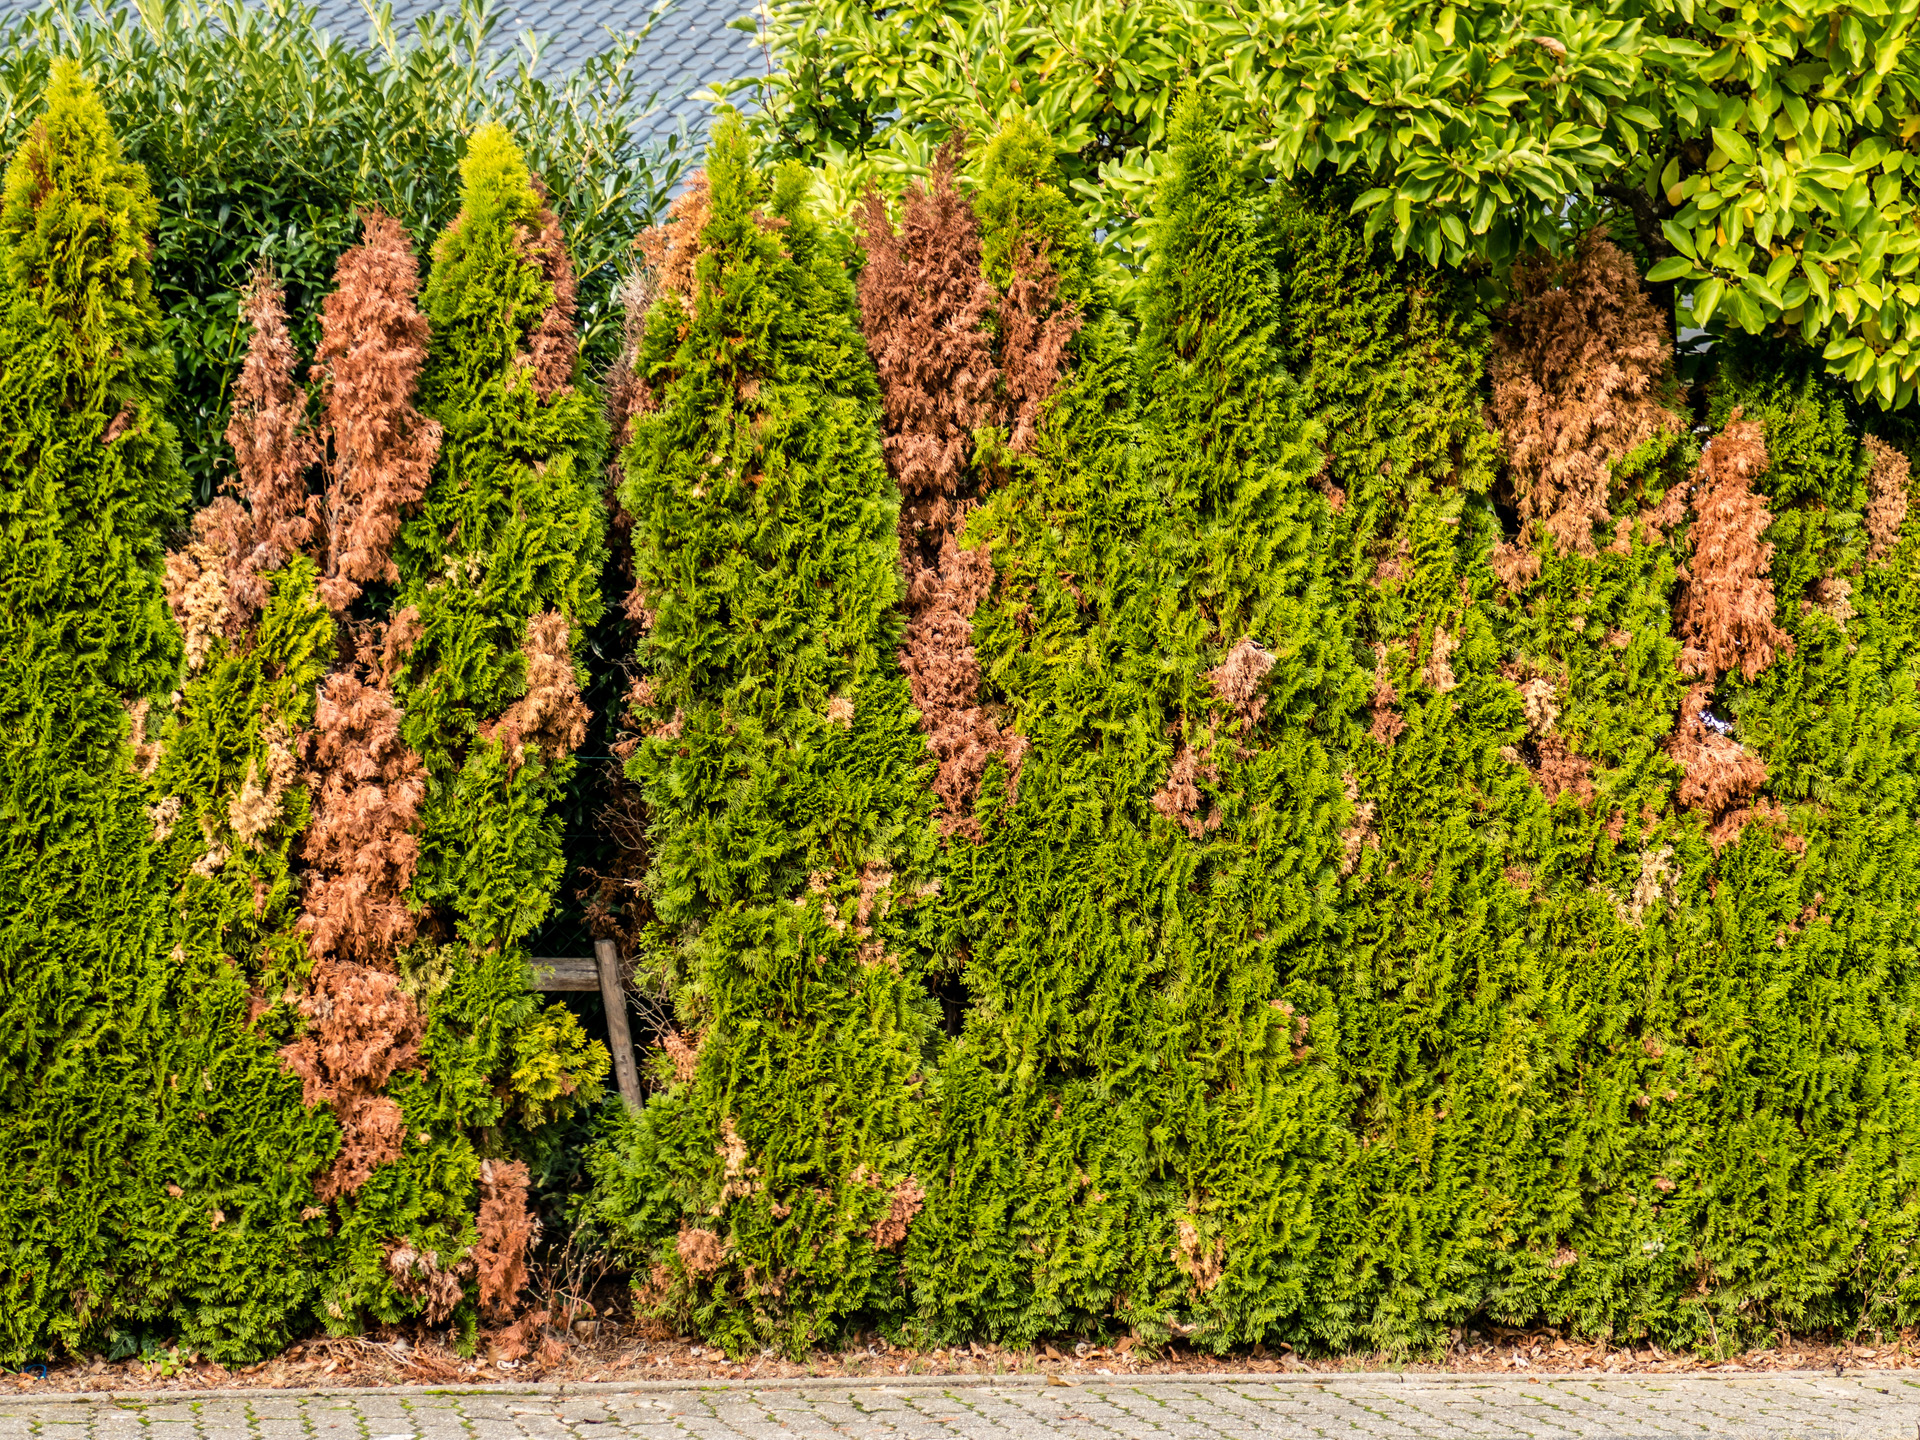 Brown patches and gaps in a hedge